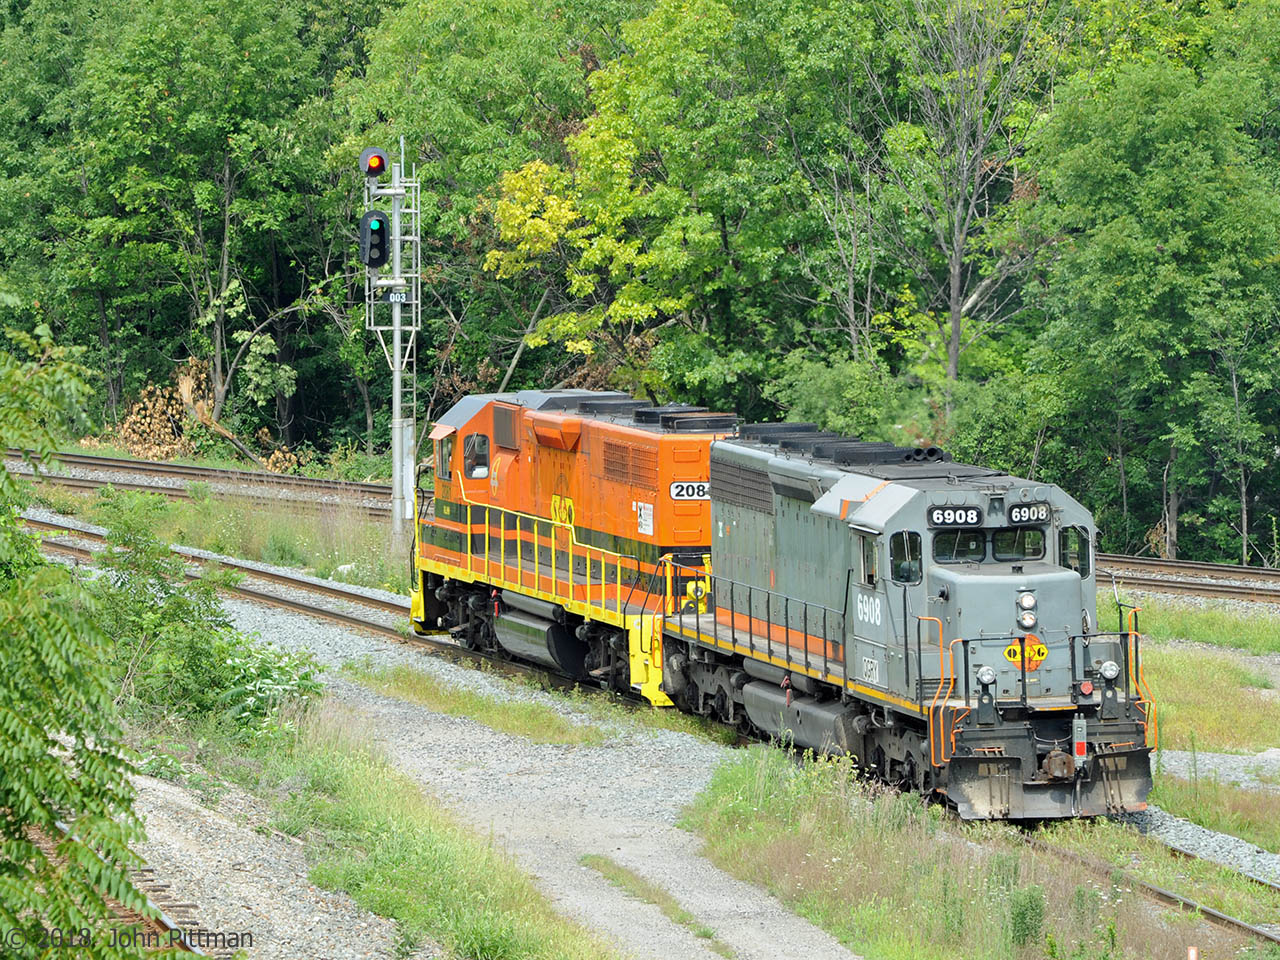 Southern Ontario Railway light power is en route from Hamilton to Brantford, seen here with a bit of Cowpath grass.  The signal indicates proceed, with switches lined for the south track of the Dundas Sub. CP's Hamilton Sub be seen between the Sumach leaves in the bottom left corner.
QGRY 6908 is an SD40-3, an Alstom rebuild of SD40 CN 5198. It emerged from rebuild as GCFX 6038, after that it became WC 6908. QGRY 6908 is carrying an SBU. It may qualify for the no-bell prize - unless it's tucked away somewhere out of sight.